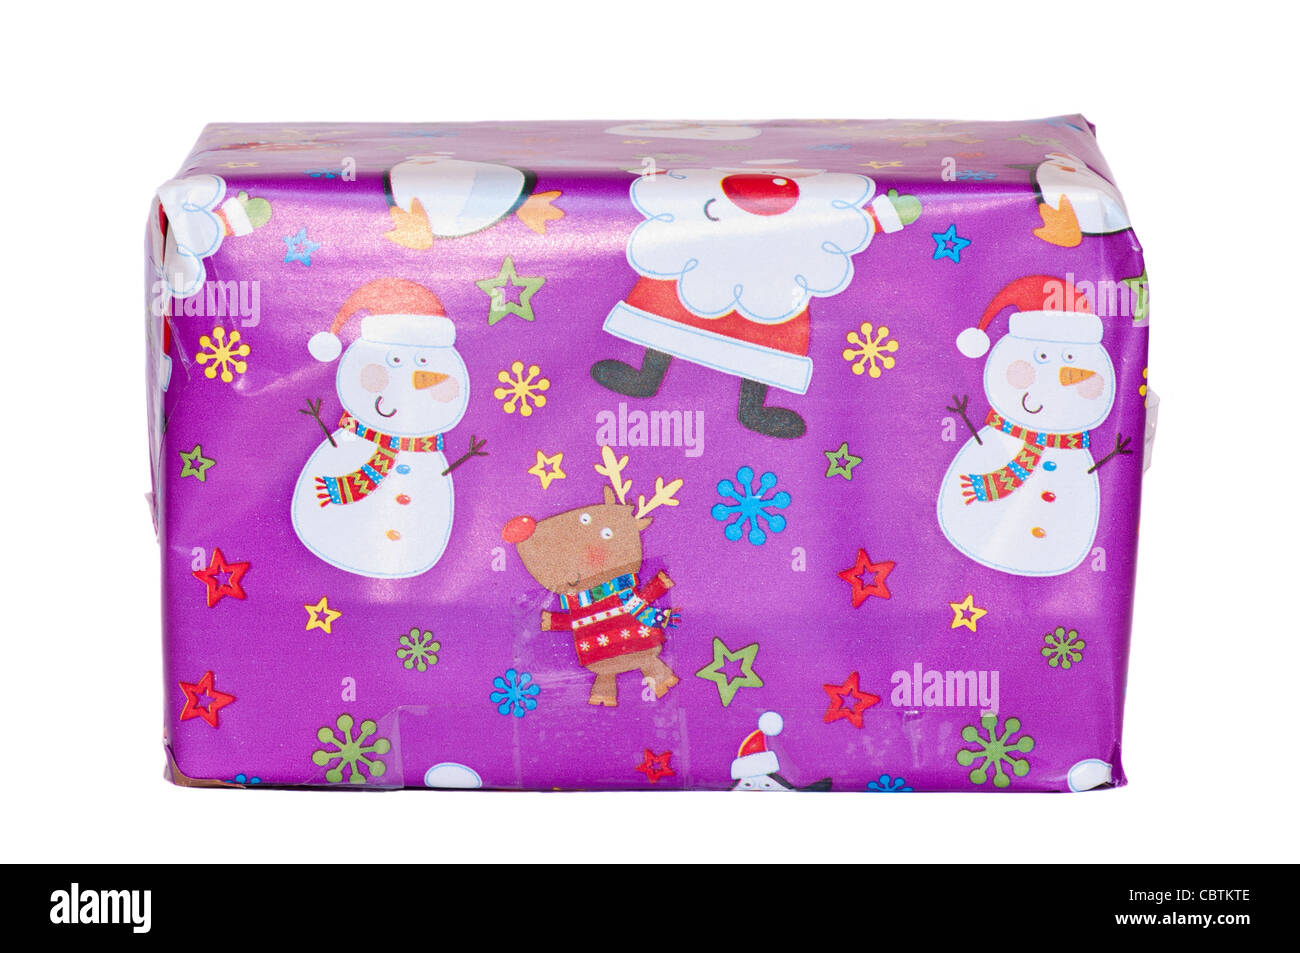 Christmas Present Wrapped In Xmas Gift Wrapping Paper Stock Photo